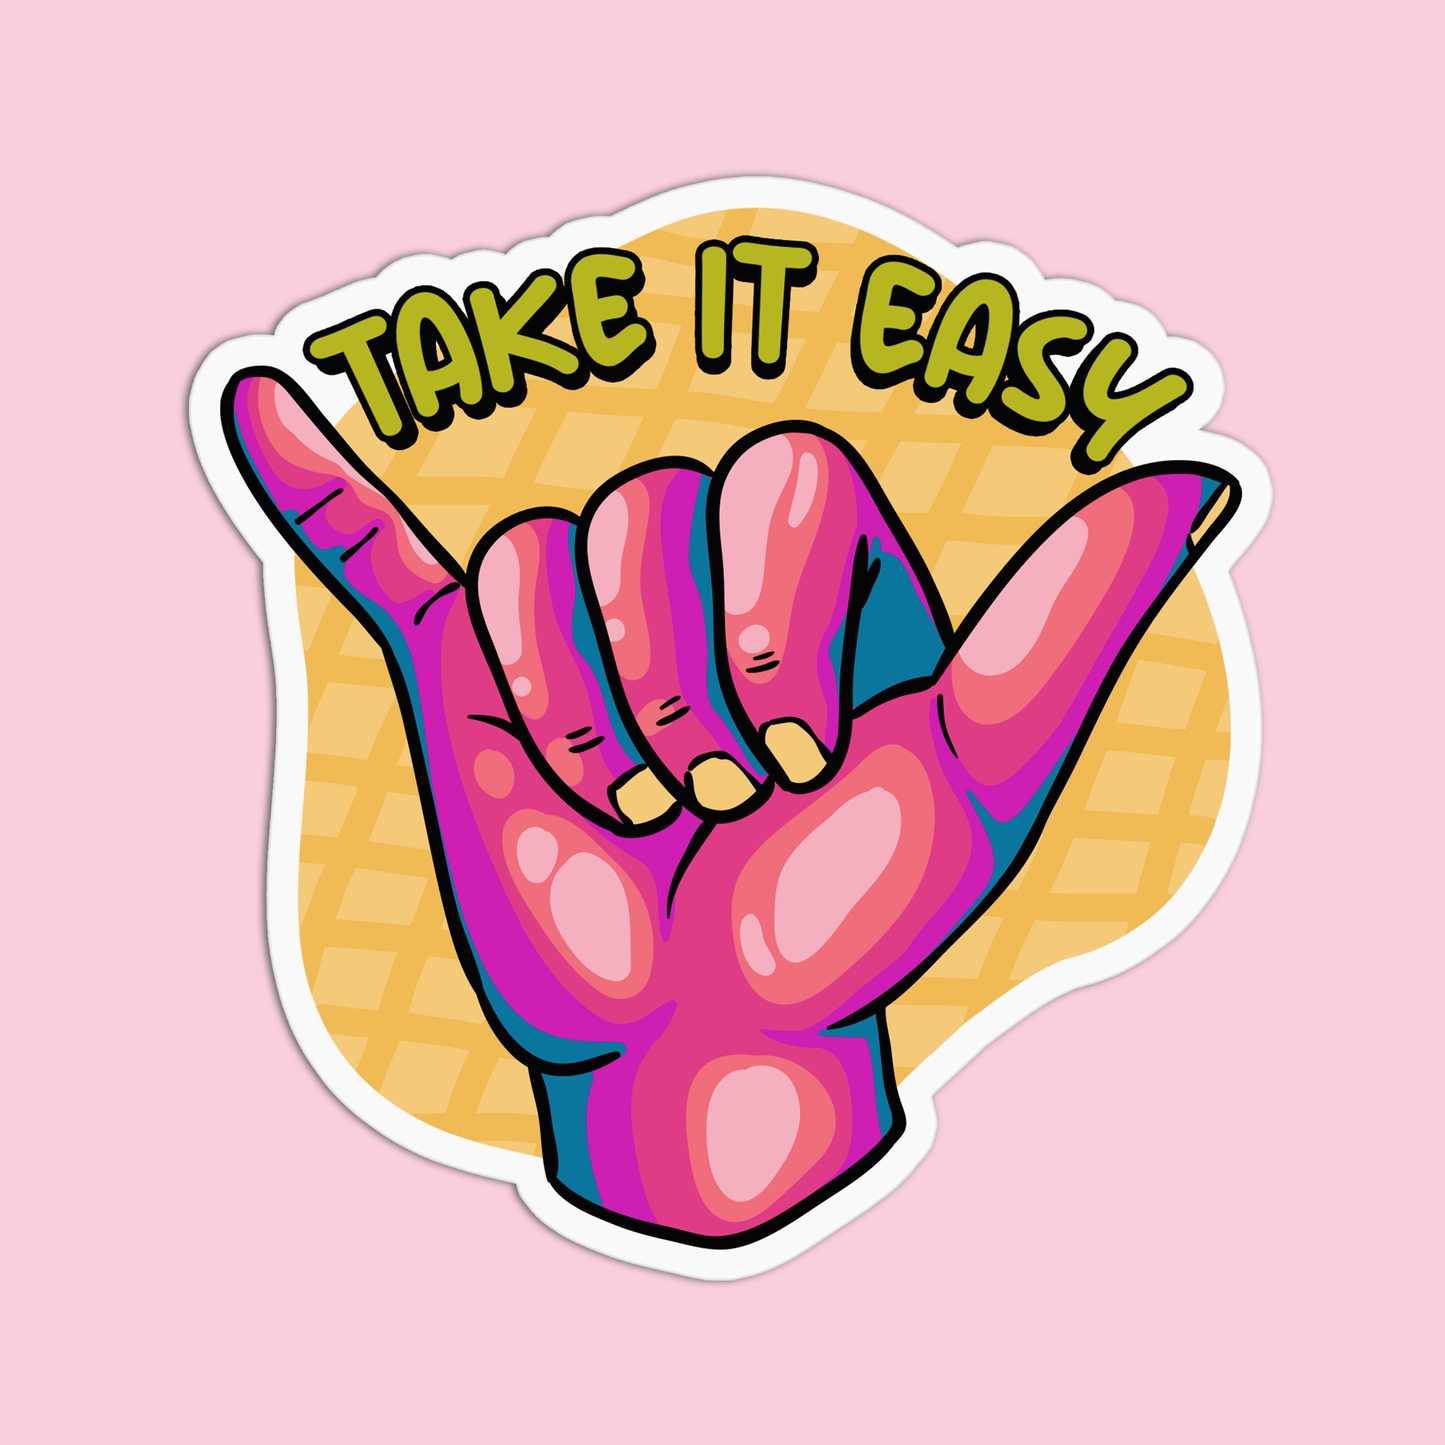 Take it easy Hawaii Stickers